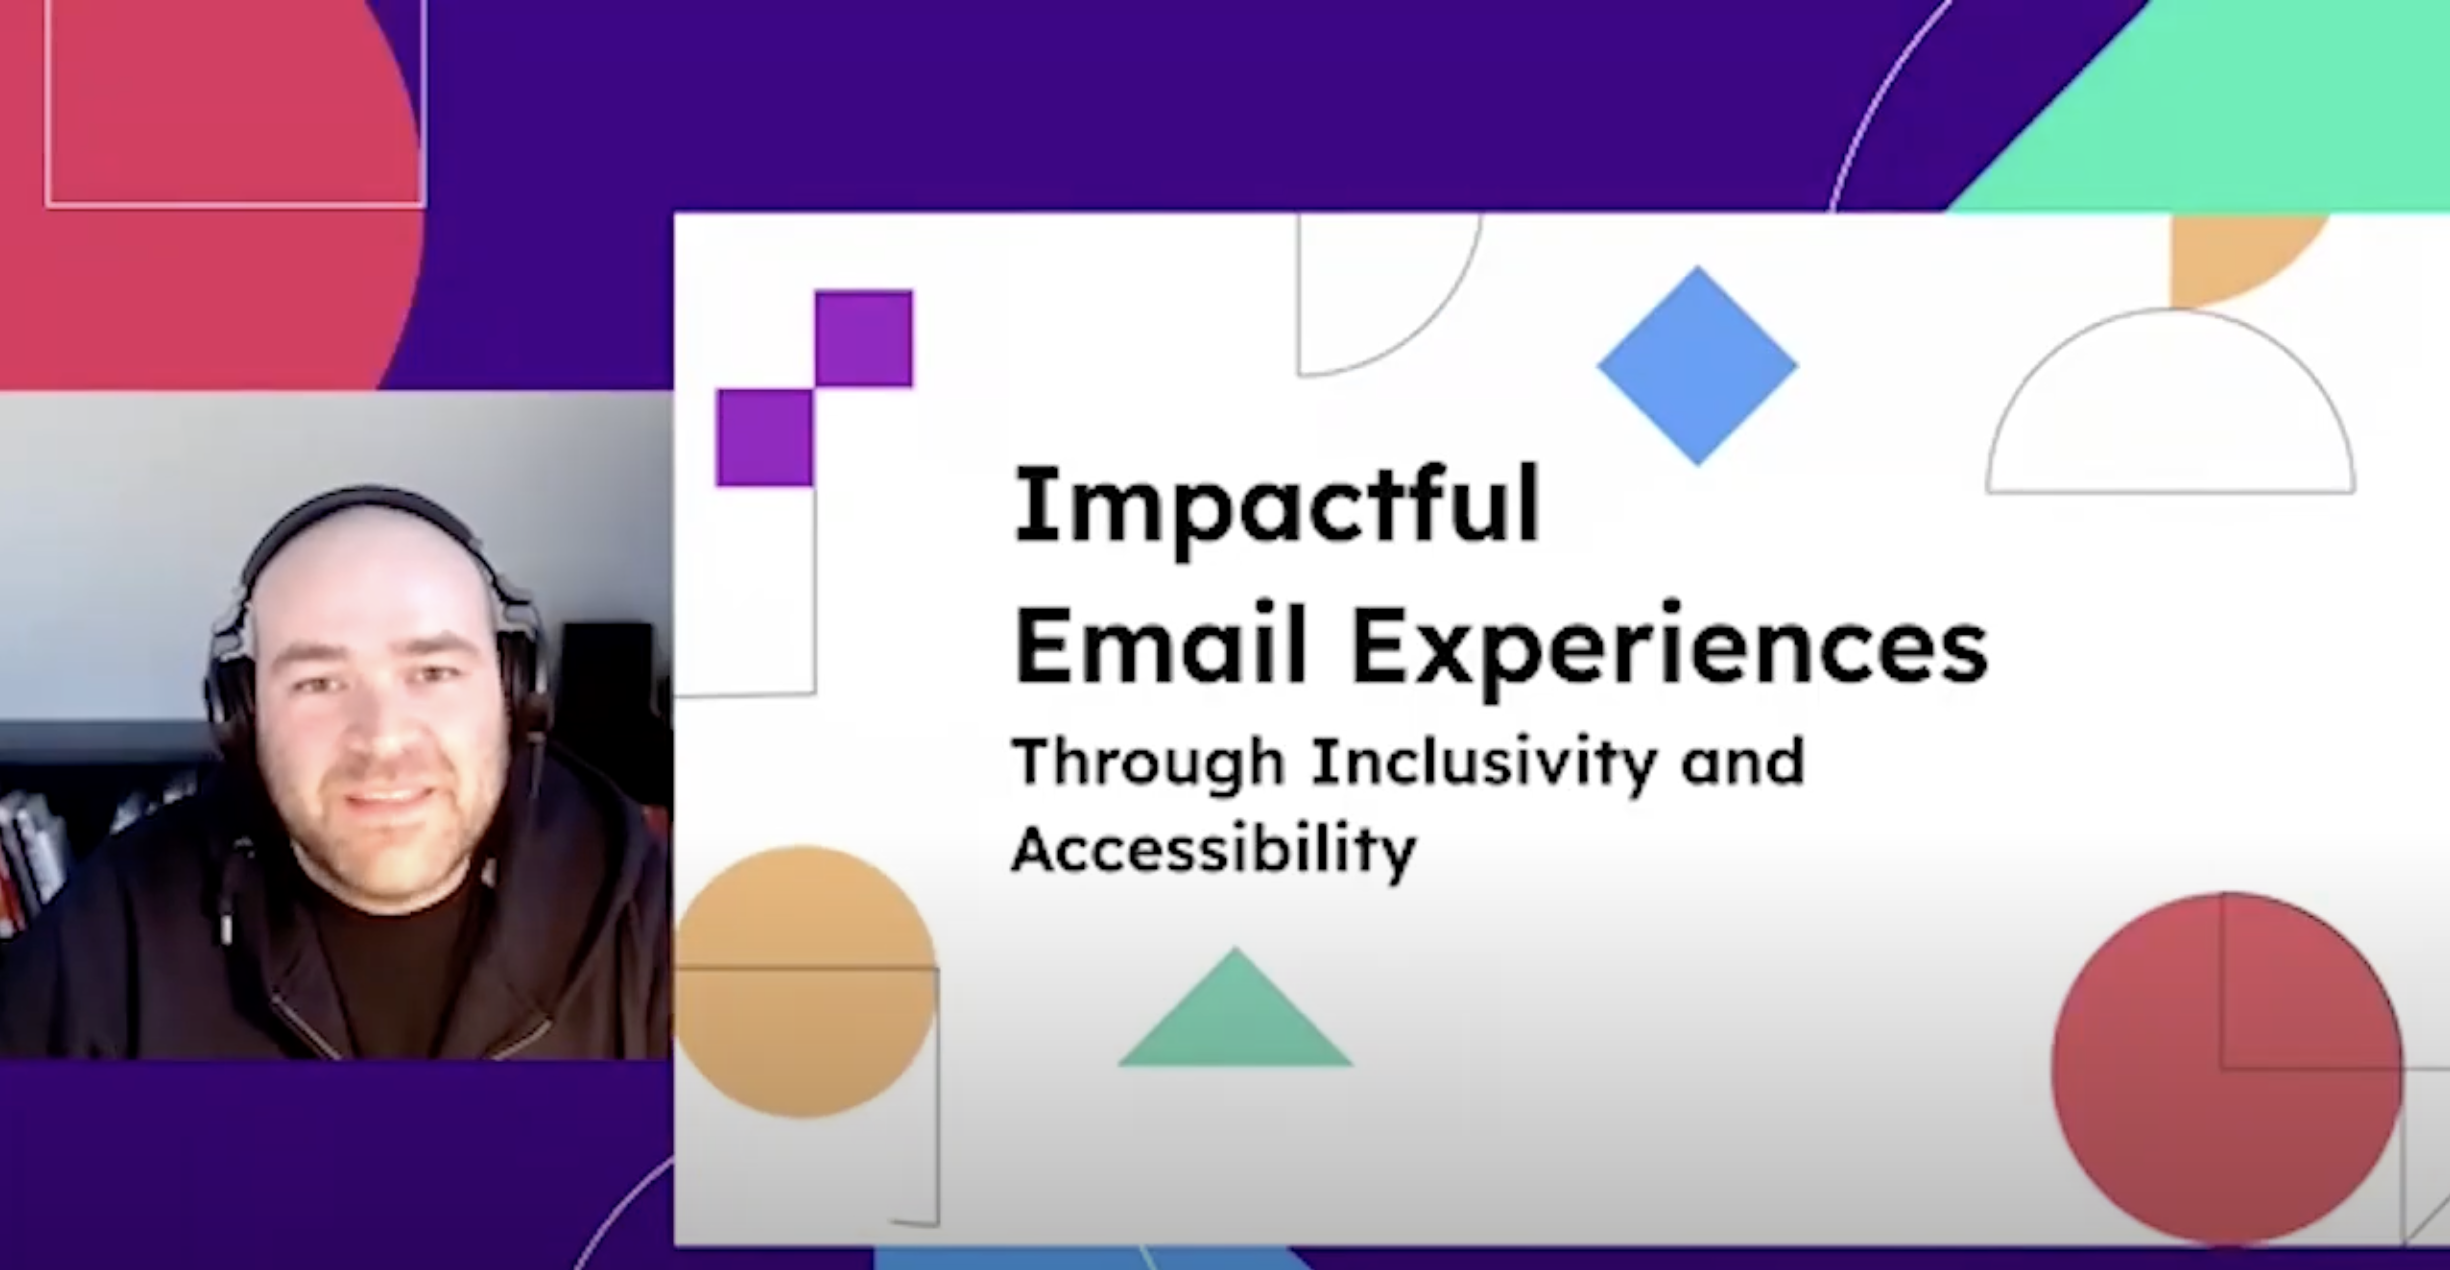 Impactful Email Experiences Through Inclusivity and Accessibility